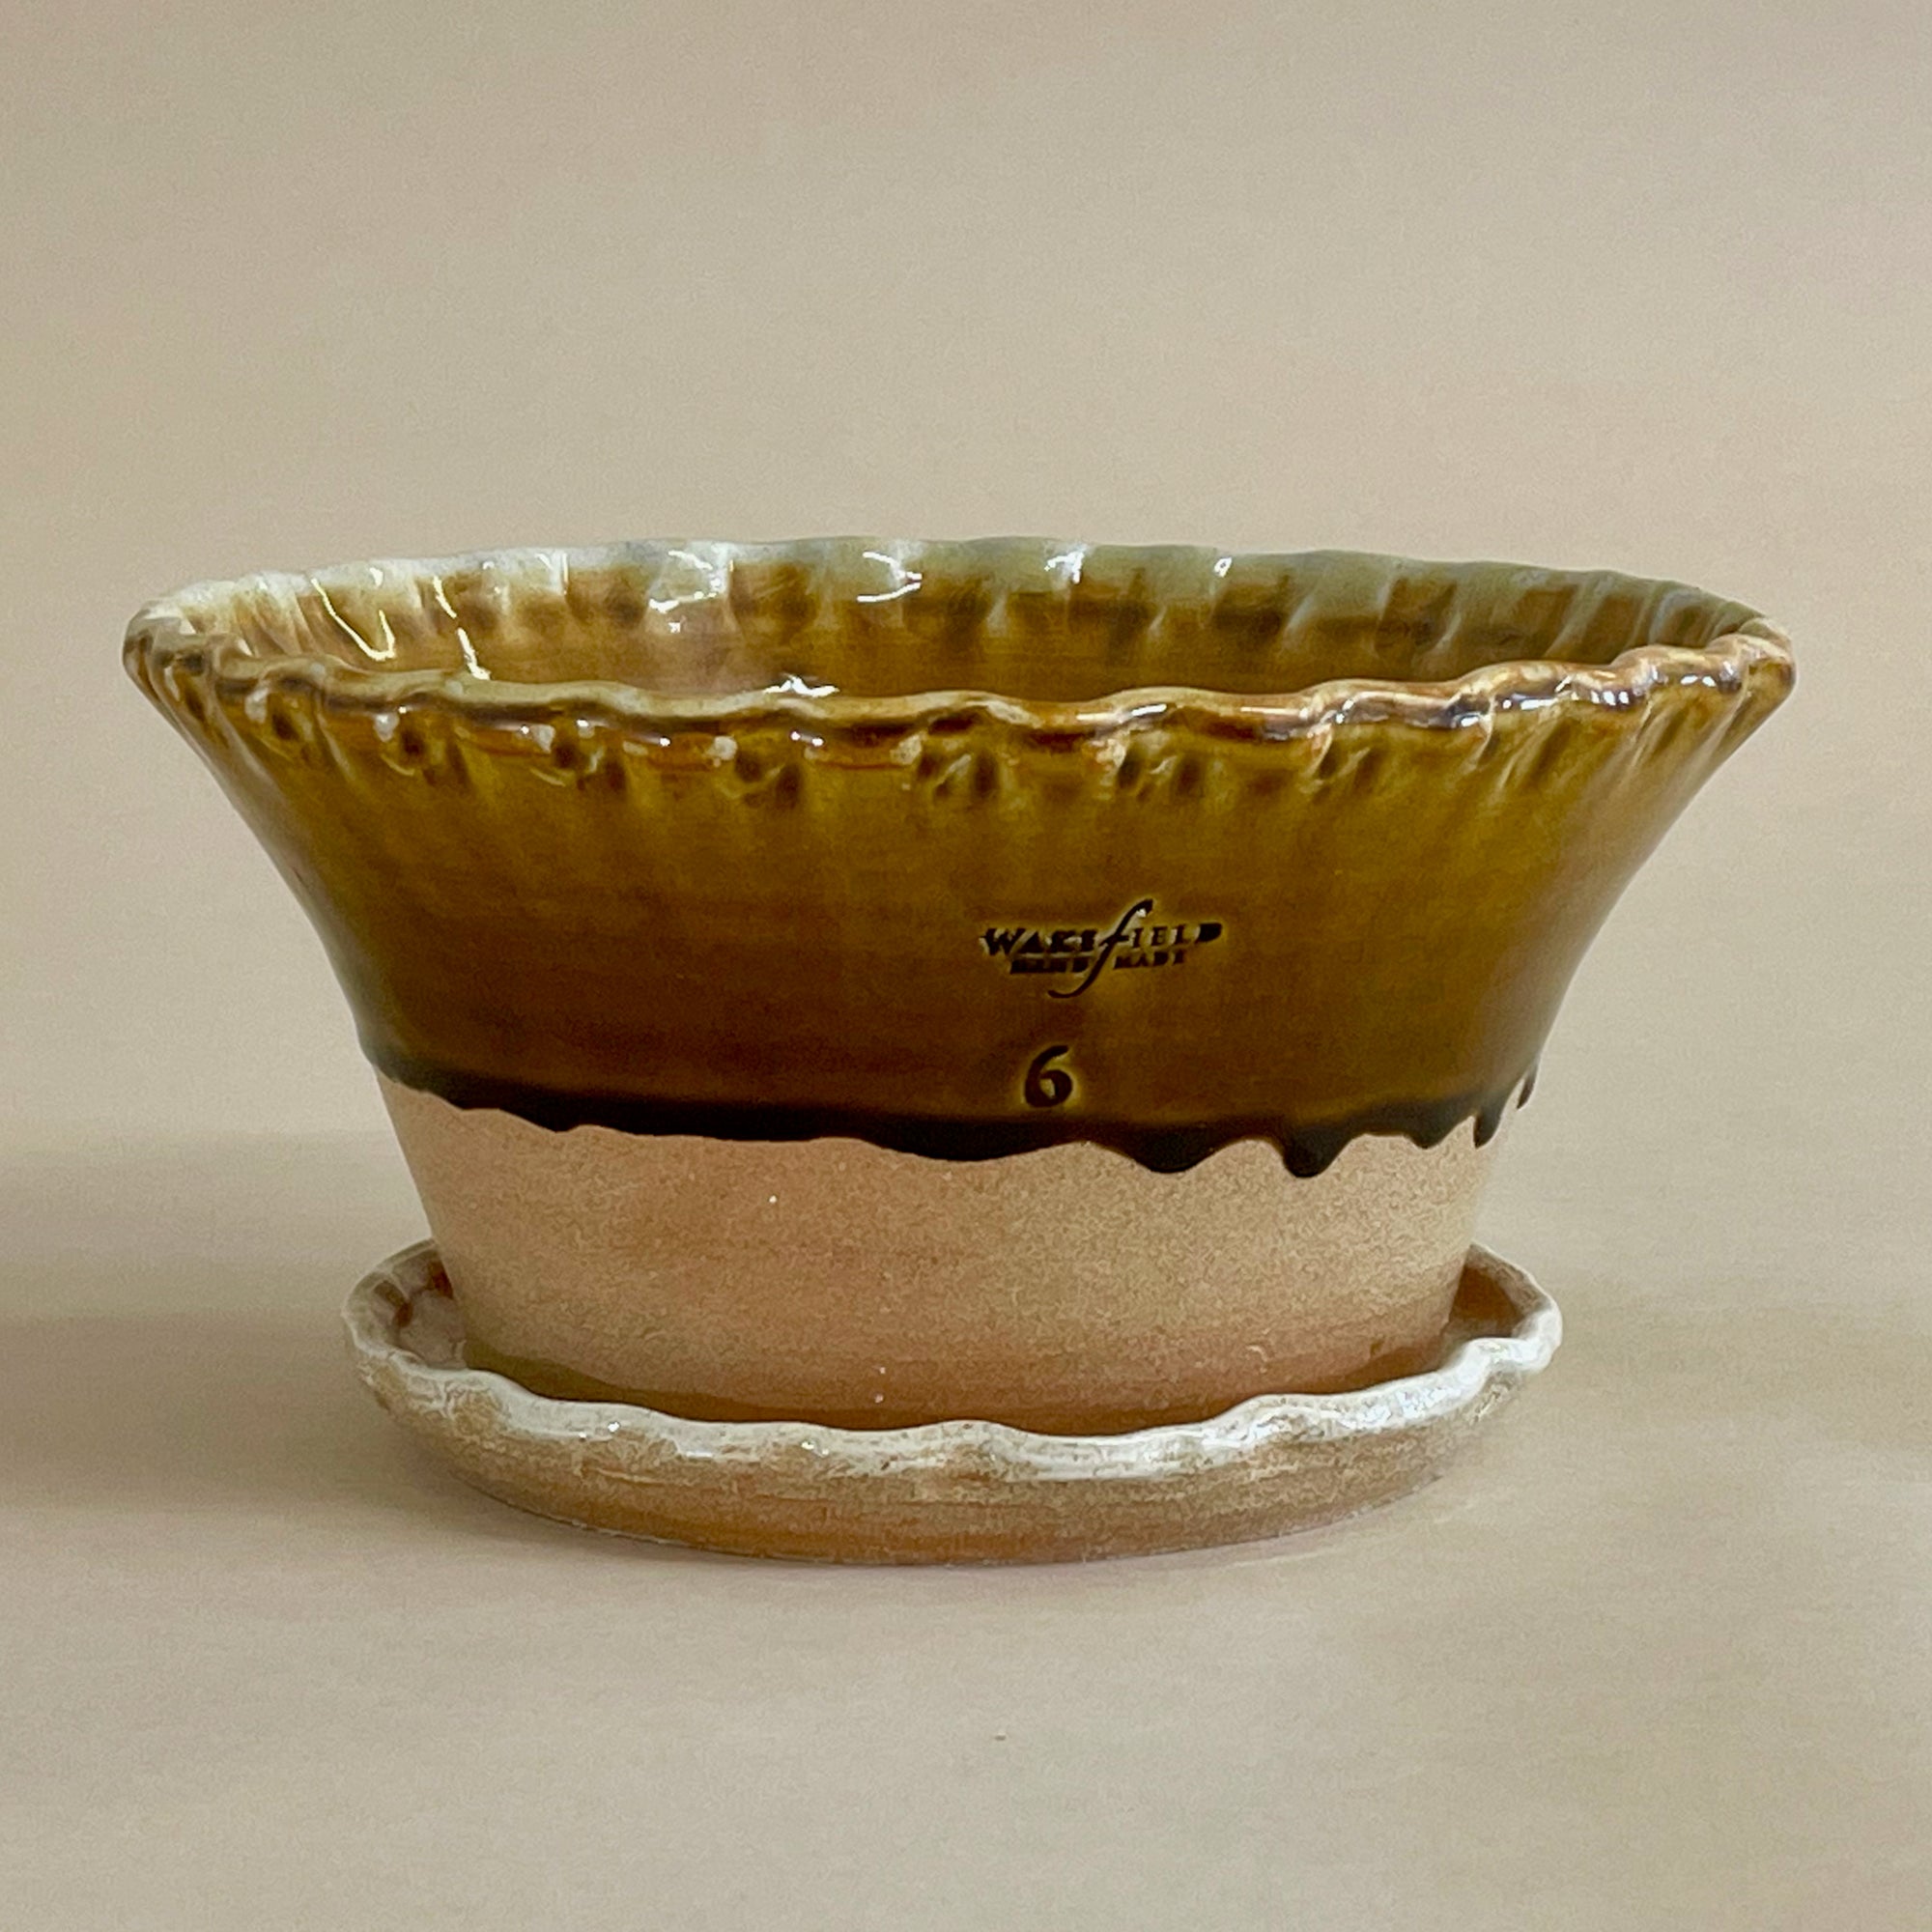 Pennsylvania Crimped Rim Paperwhite Pot with Attached Saucer